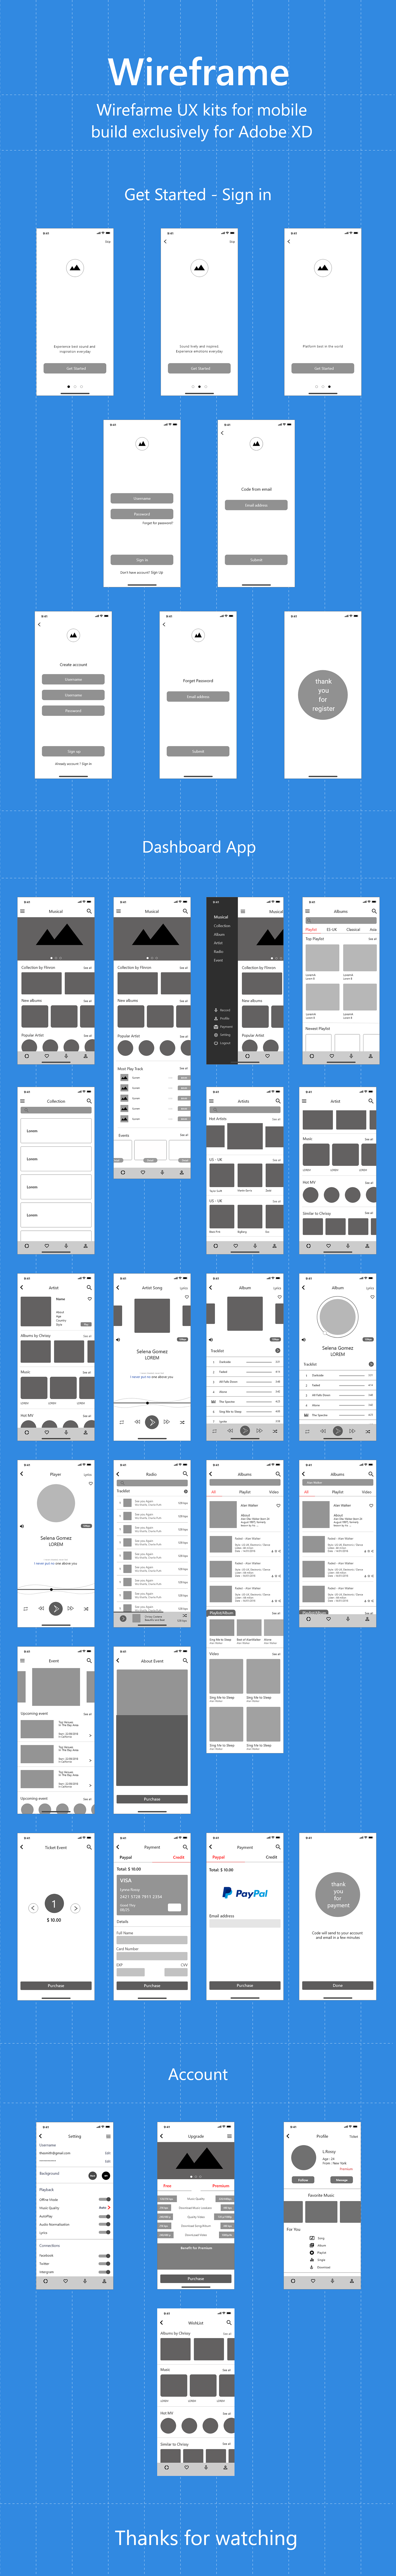 UI ux interactive design music Mobile app wireframe free download